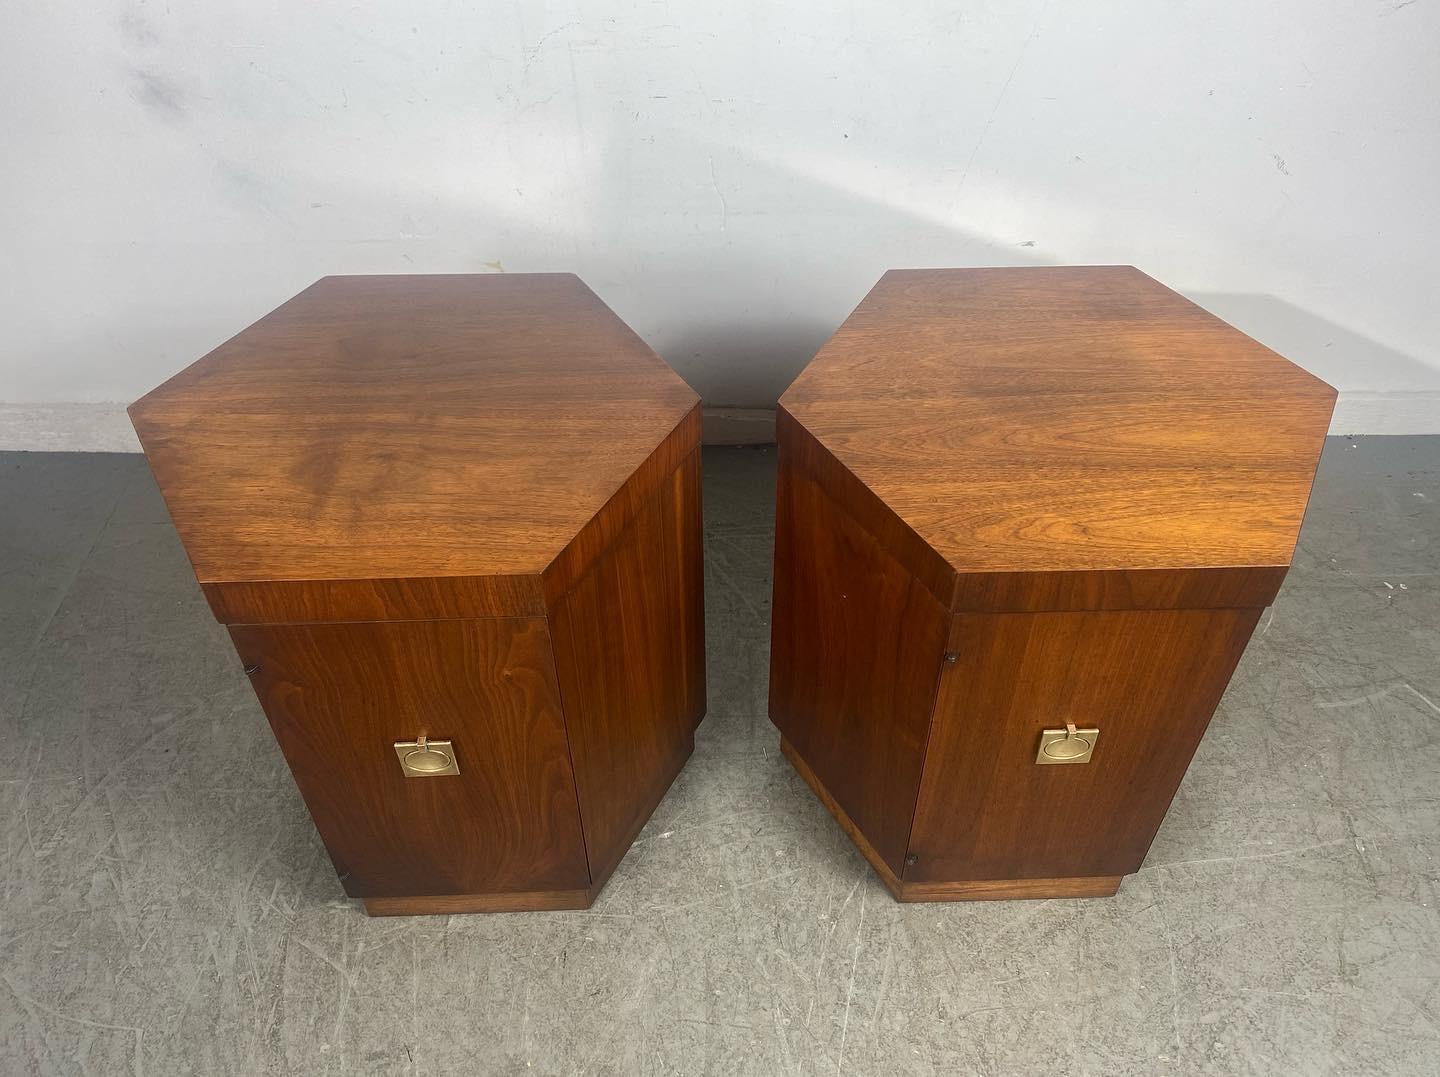 American Stunning Pair Hexagon Tables / Stands, , Harvey Probber Style made by Lane For Sale